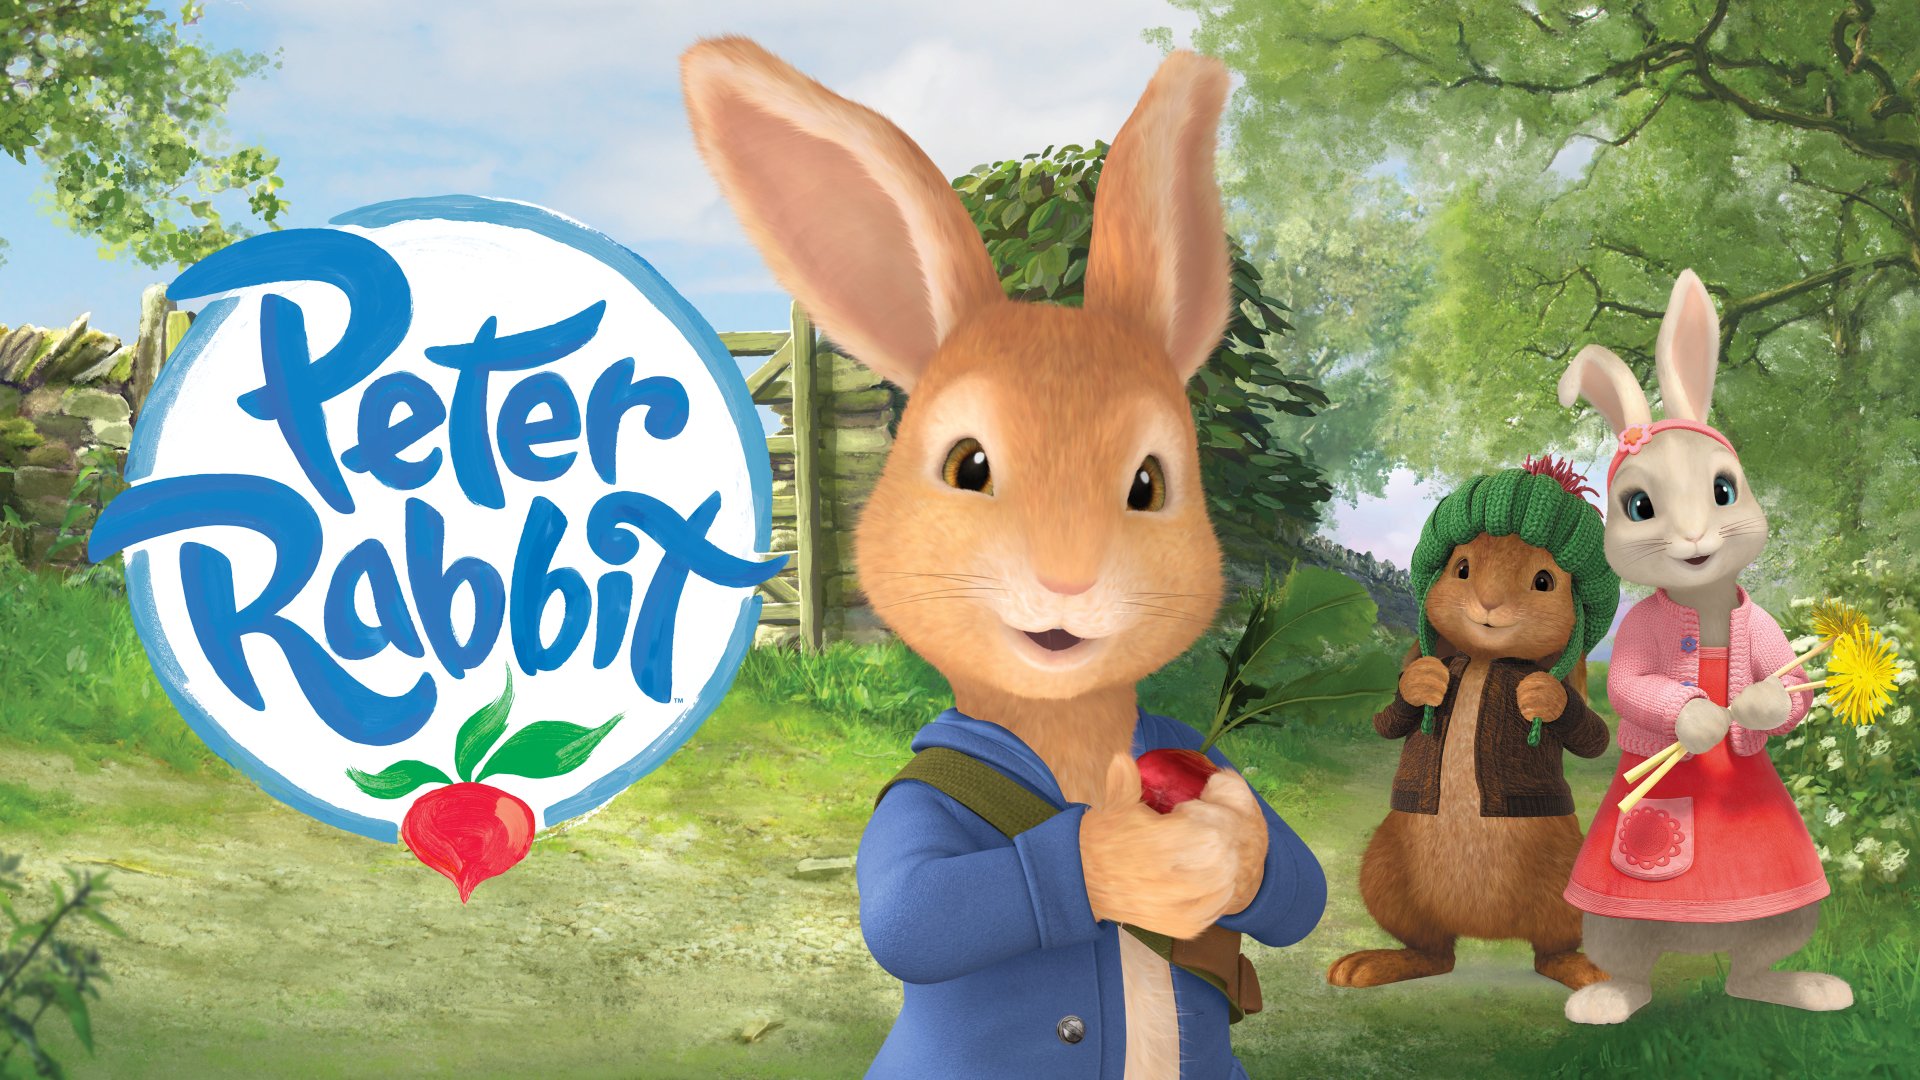 Peter Rabbit streaming: where to watch movie online?